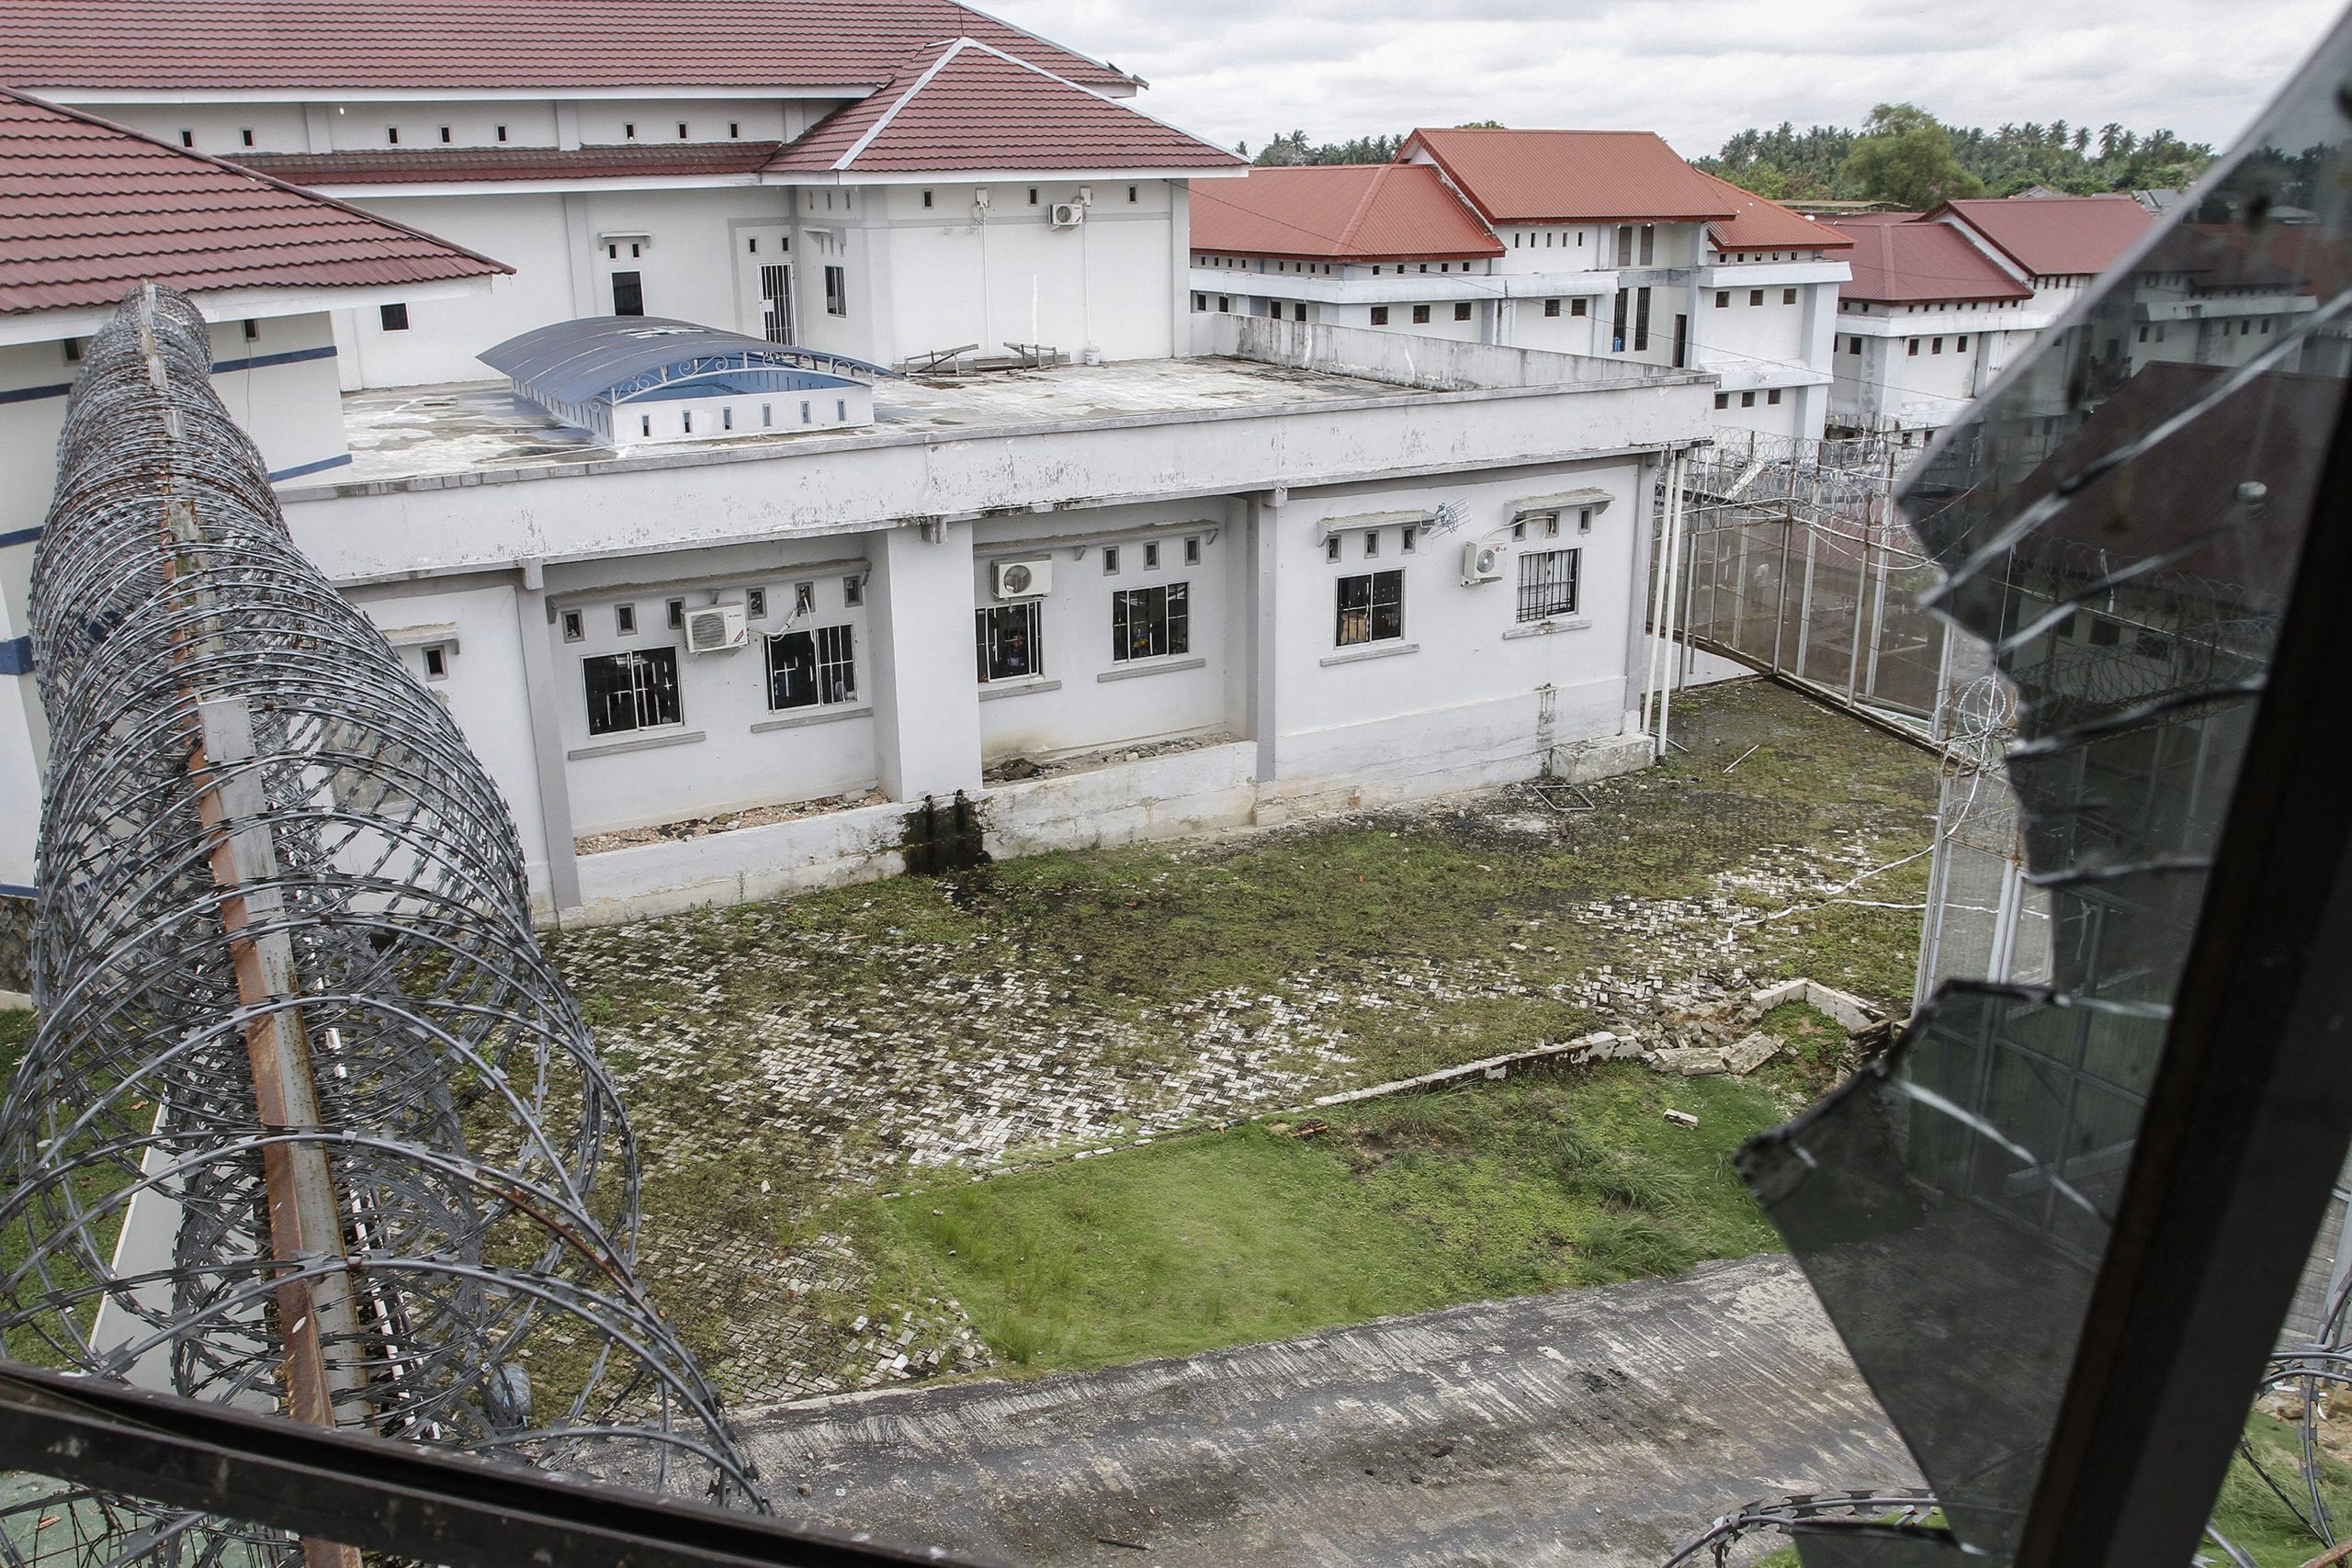 53 inmates escaped from prison in Indonesia